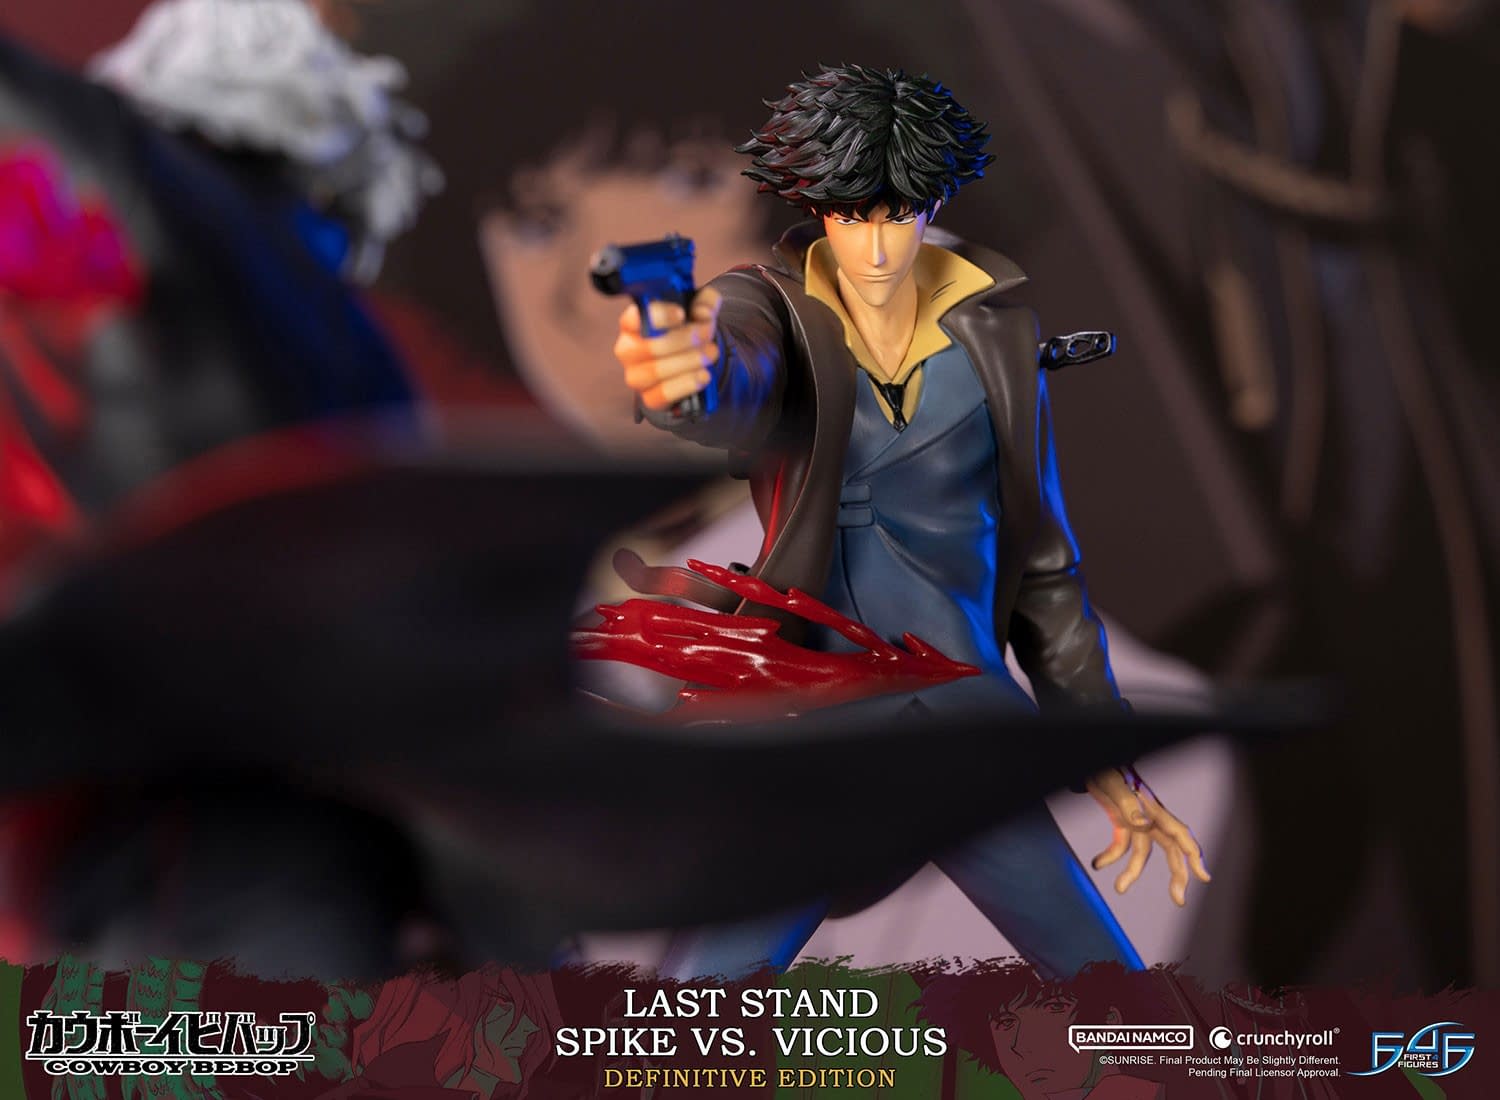 Cowboy Bebop Comes to First 4 Figures with Spike vs. Vicious Statue